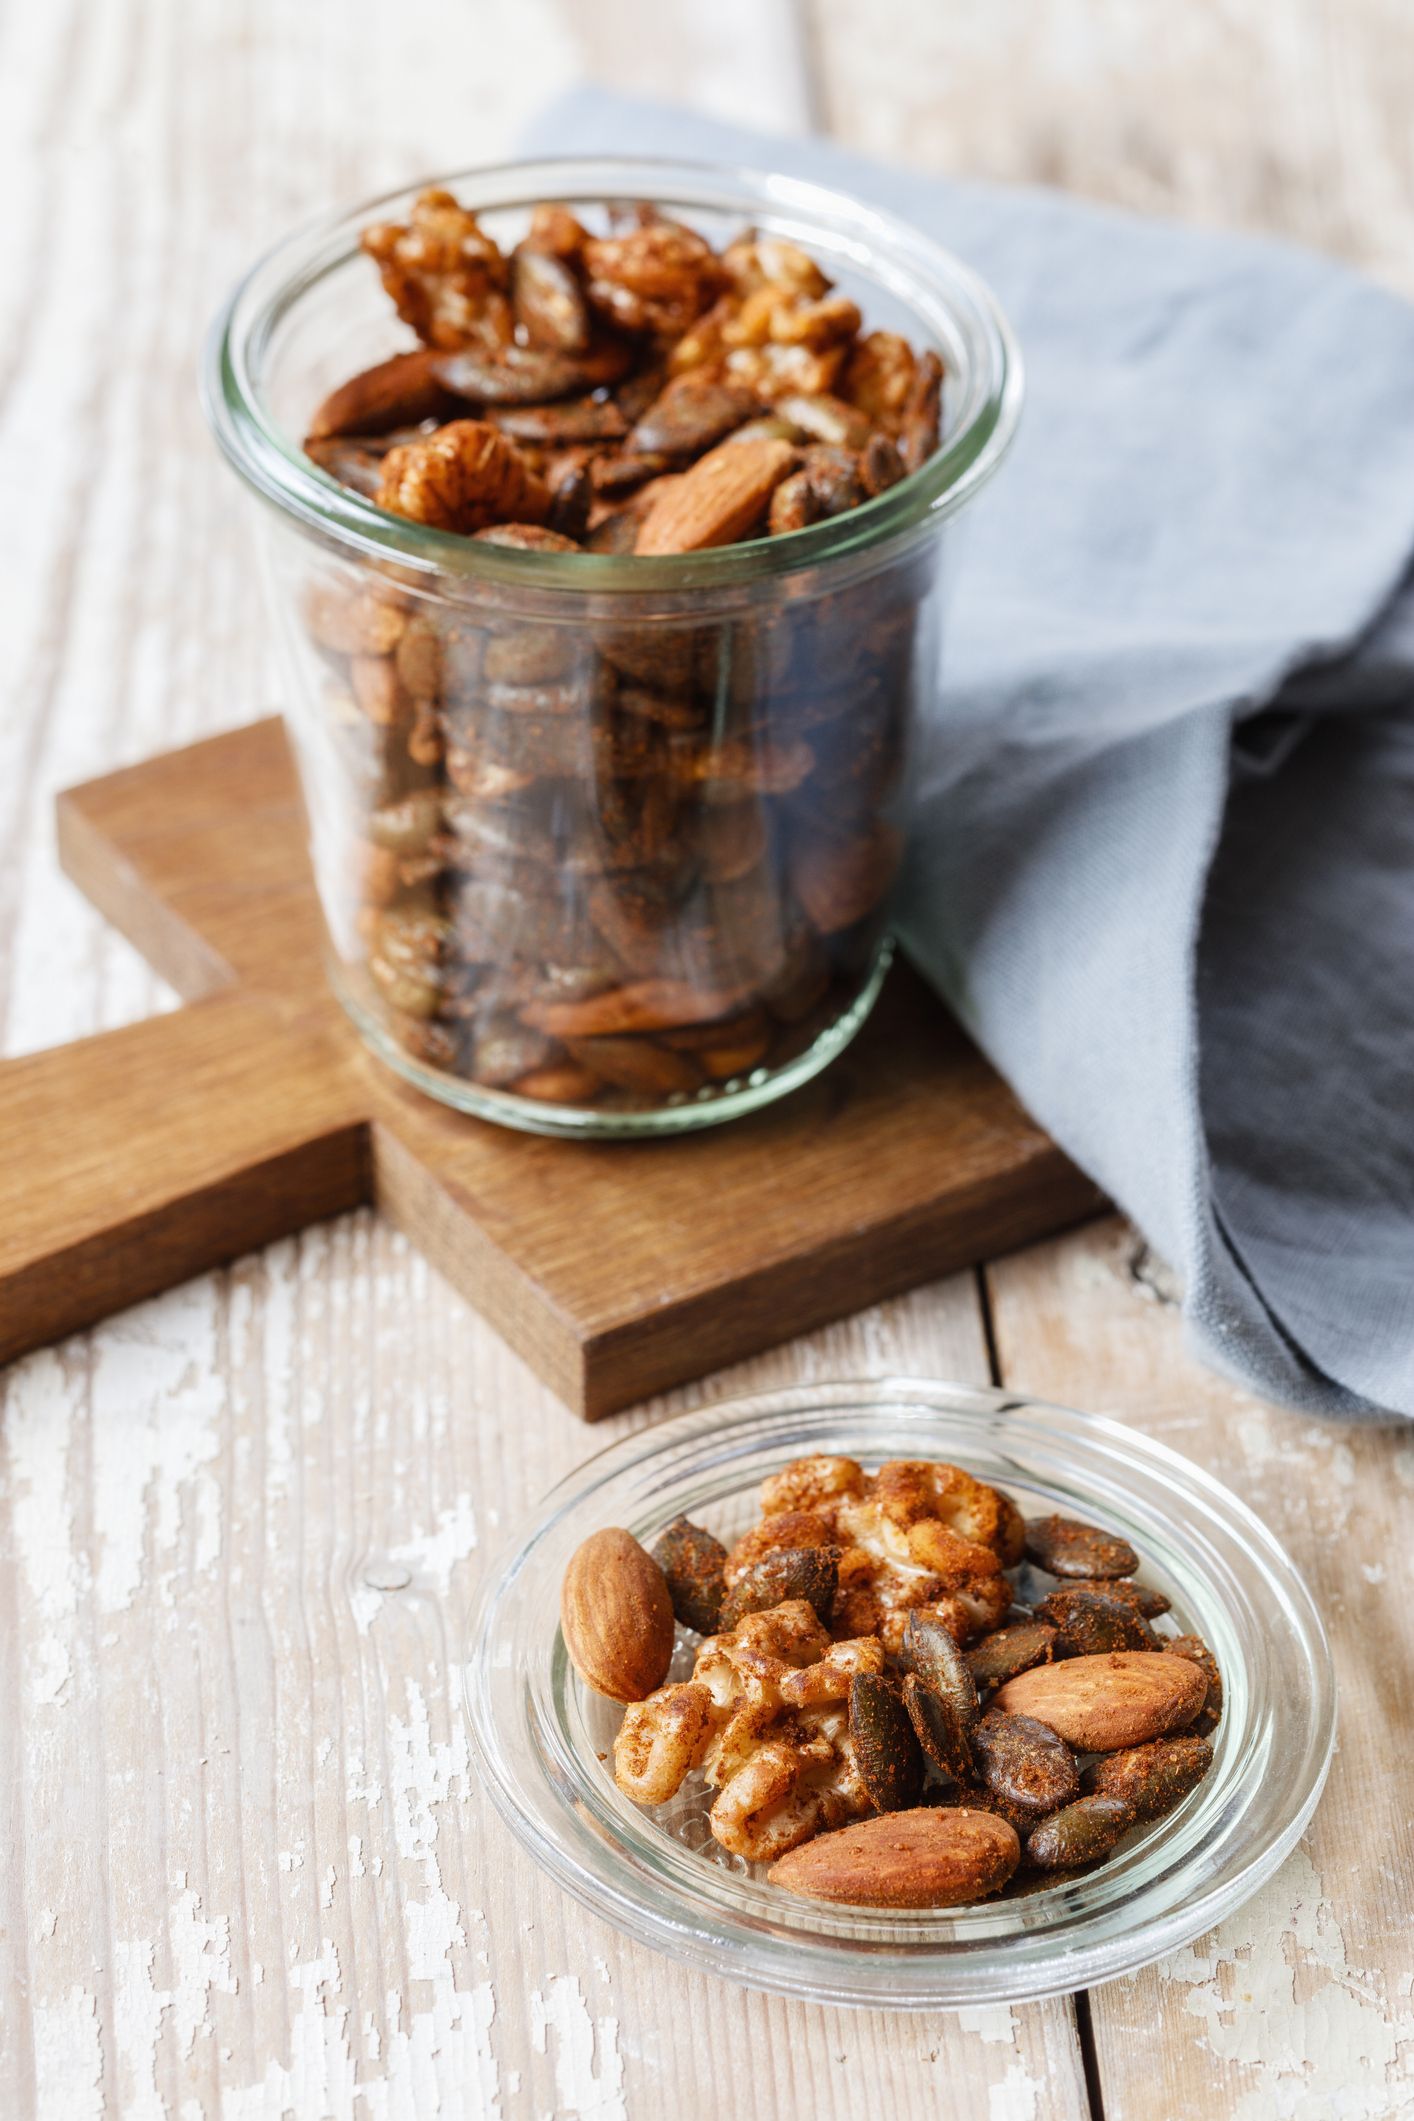 https://hips.hearstapps.com/hmg-prod/images/homemade-roasted-flavored-nuts-almonds-walnuts-and-royalty-free-image-1640715282.jpg